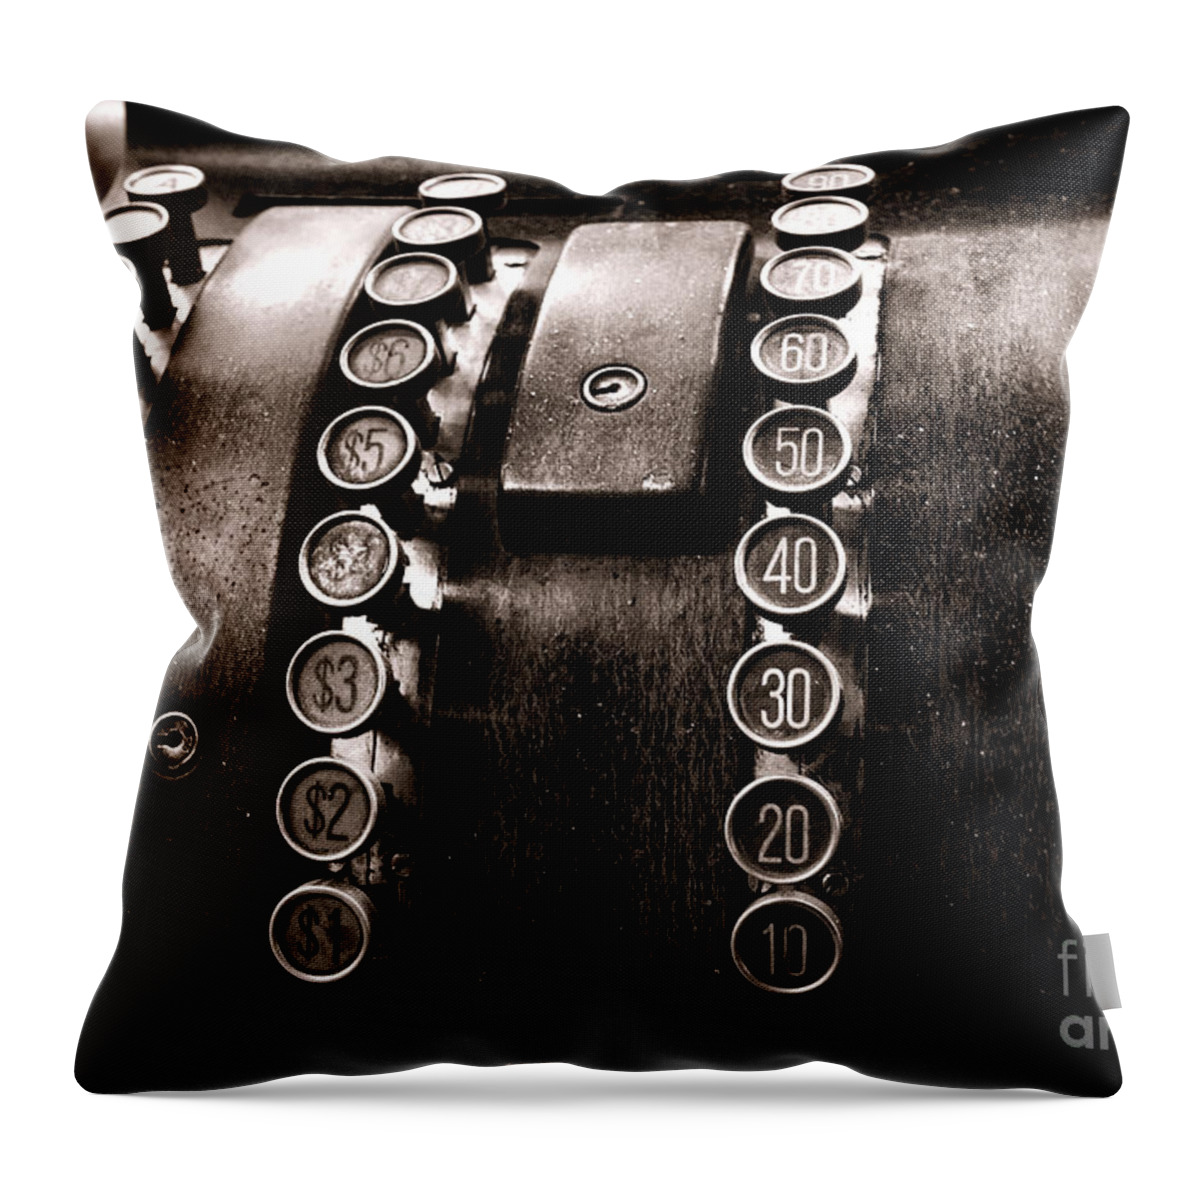 National Throw Pillow featuring the photograph National Cash Register by Olivier Le Queinec